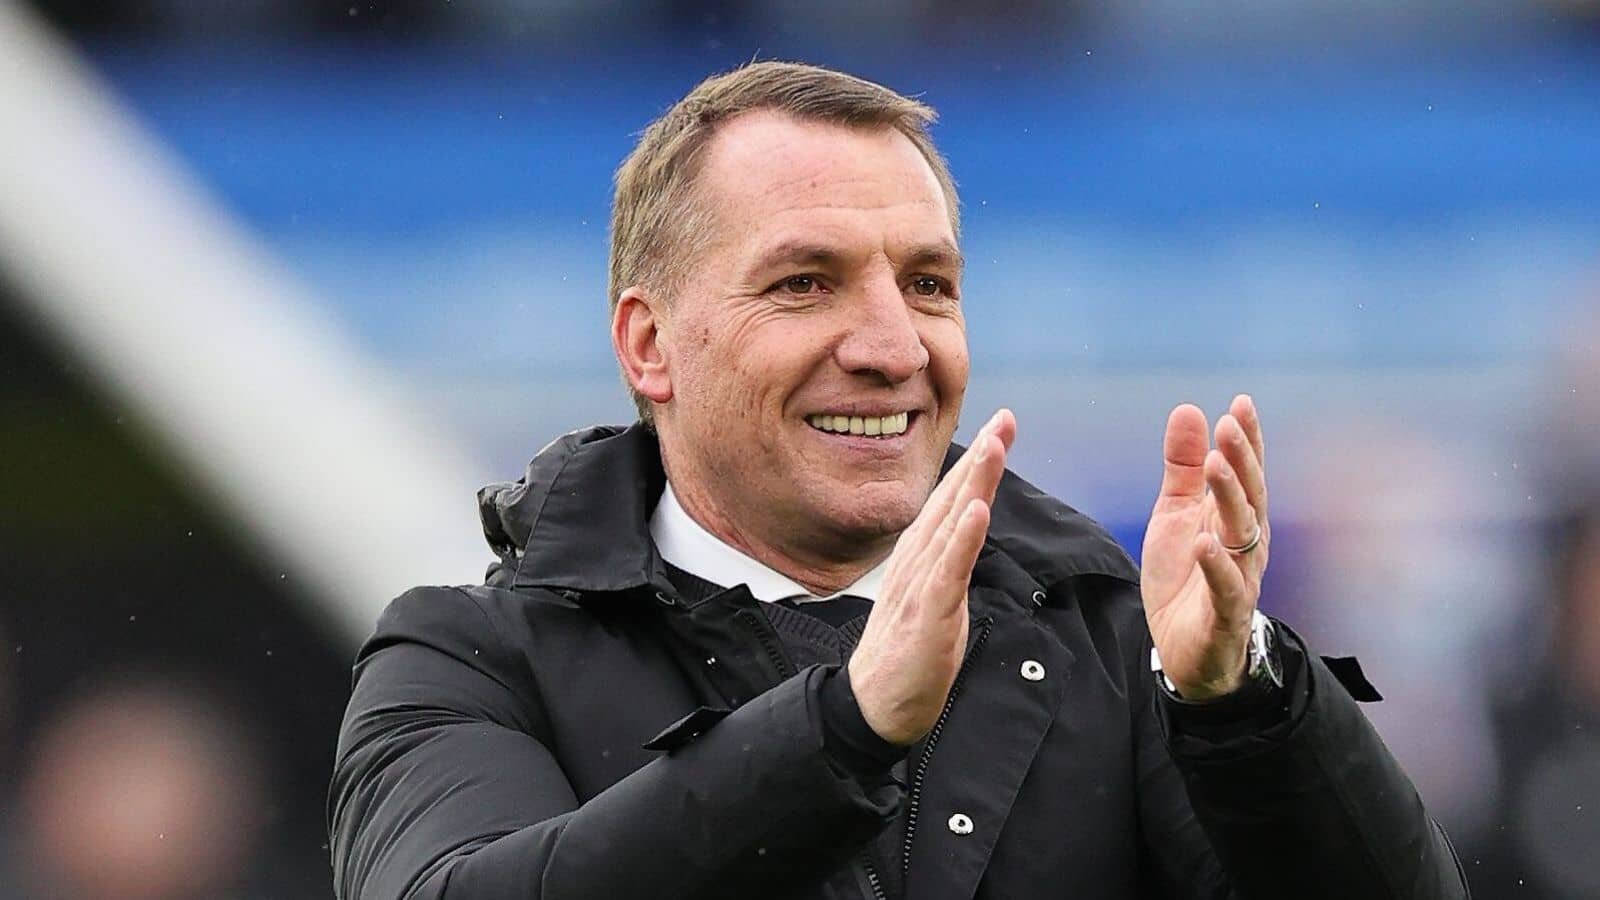 Done Deal: Celtic Head Coach Brendan Rodgers Lands With Another Strong Star